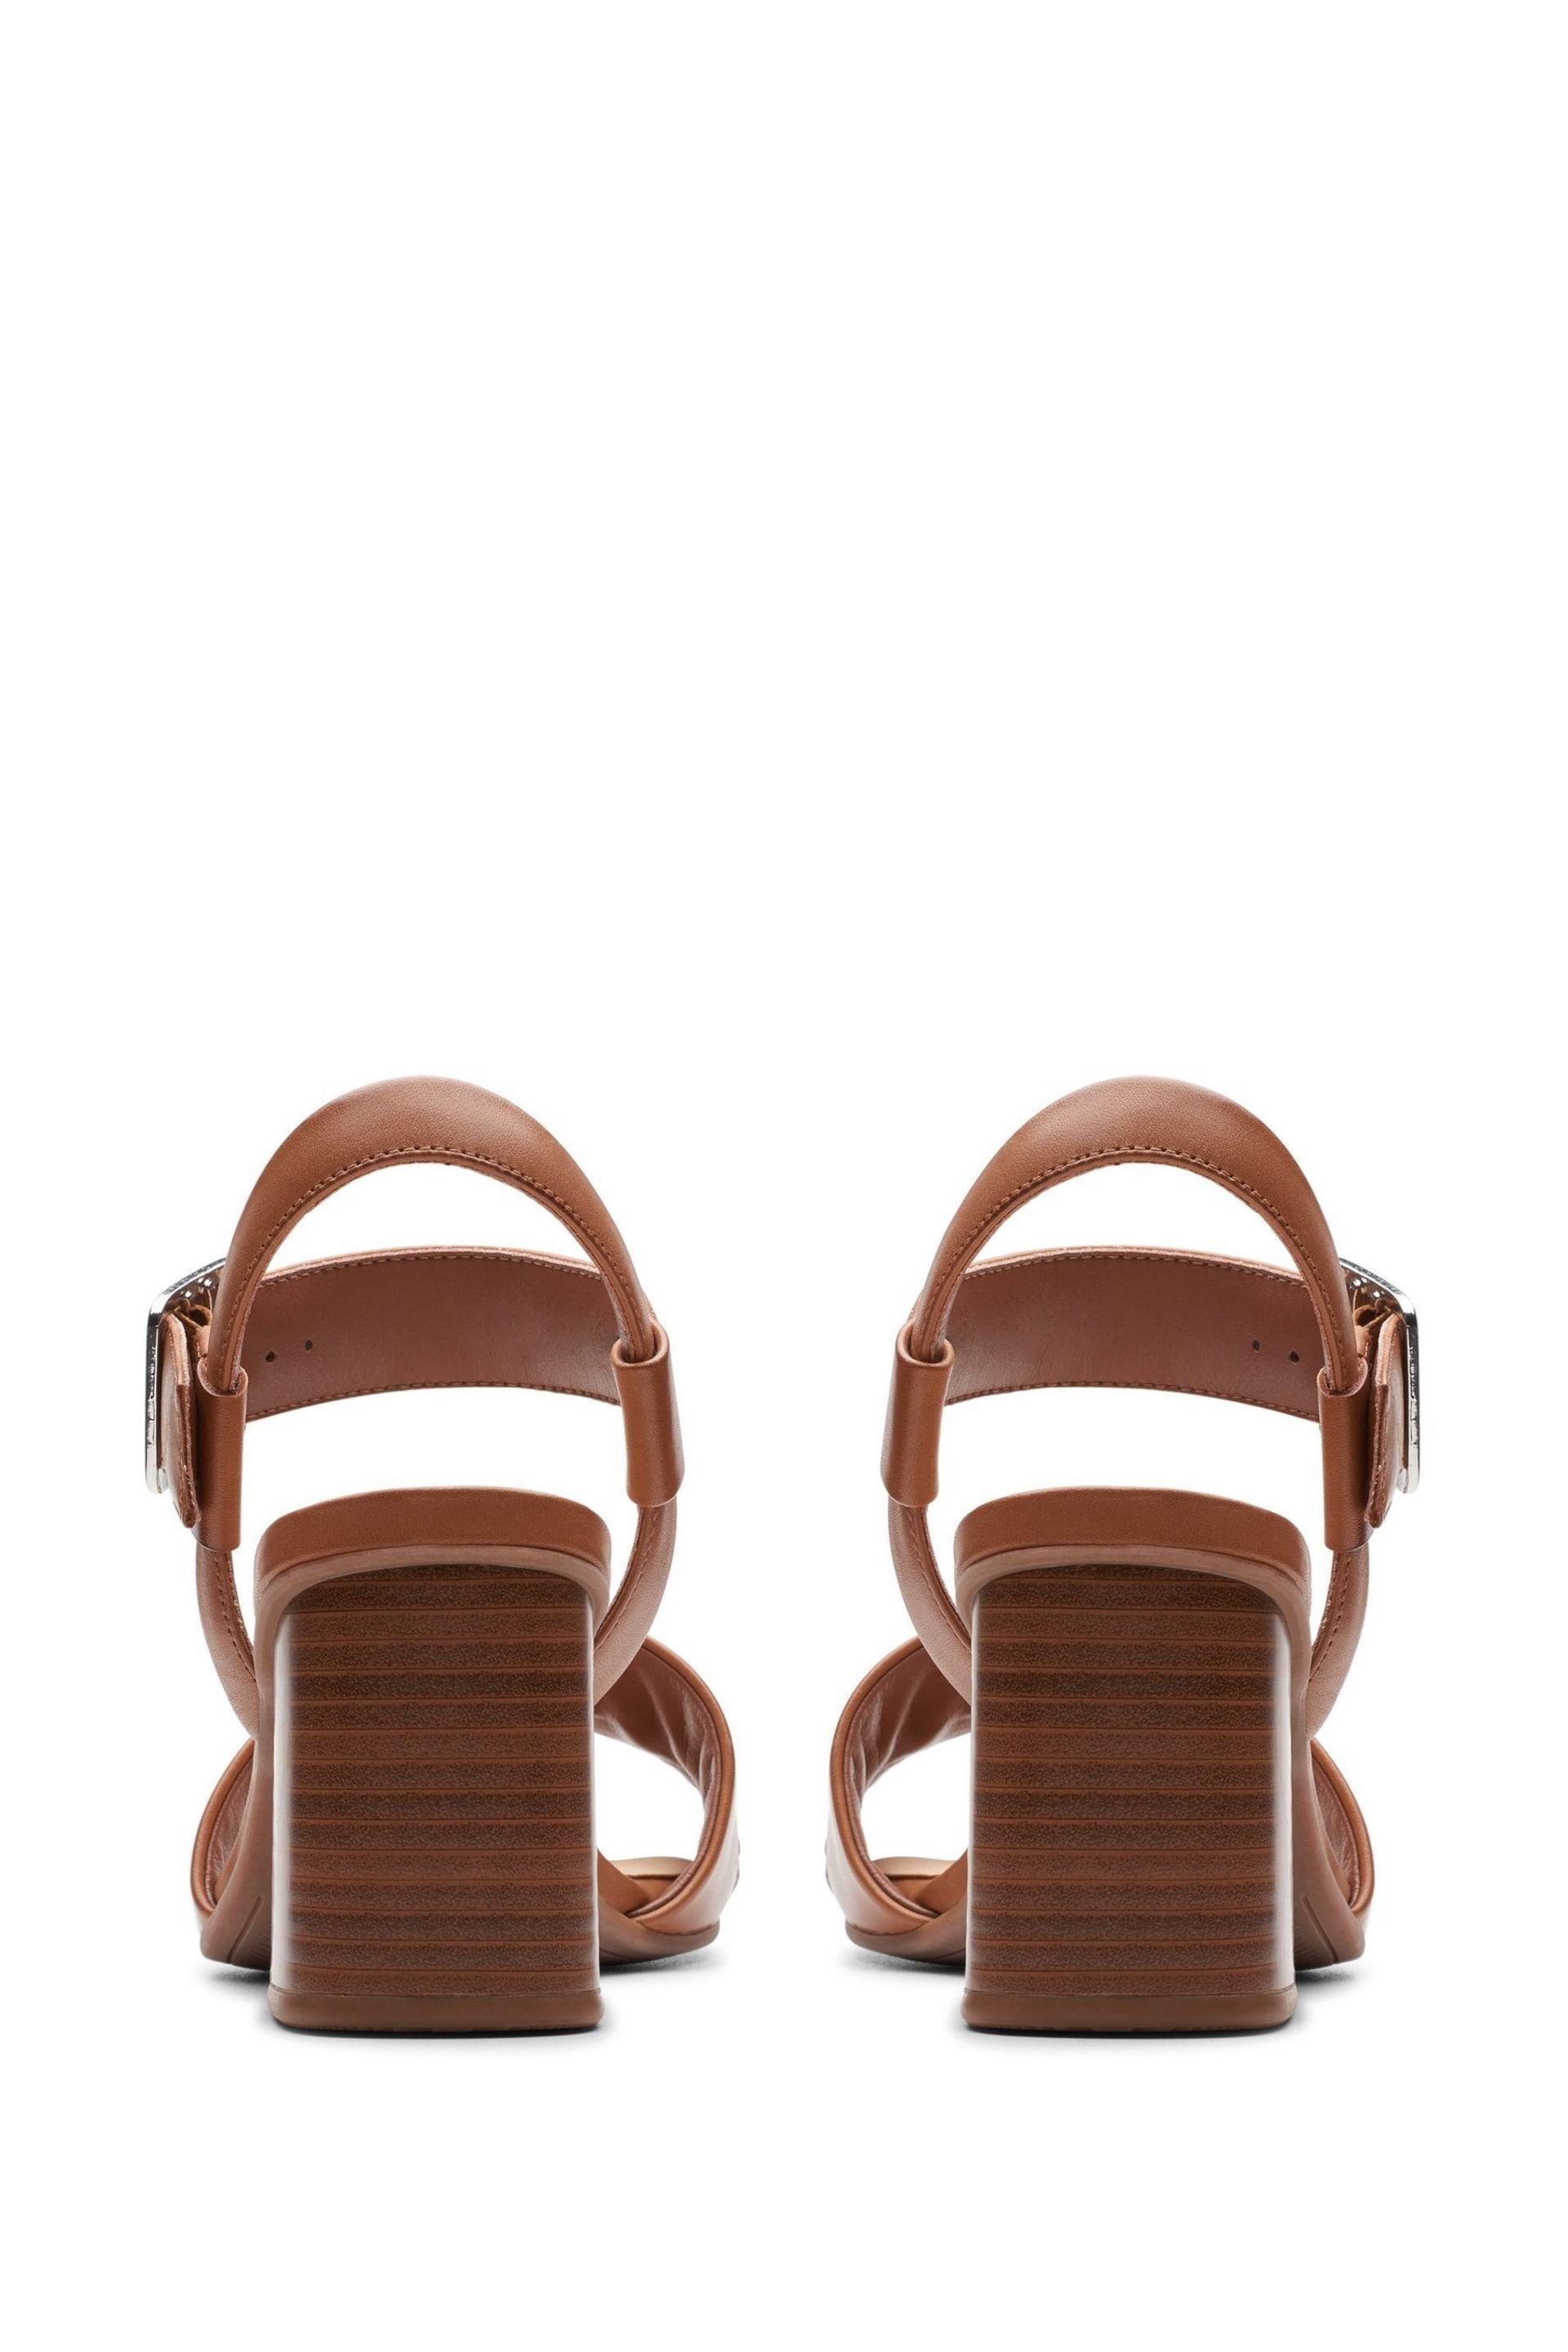 Clarks Brown Leather Siara65 Buckle Sandals - Image 5 of 7